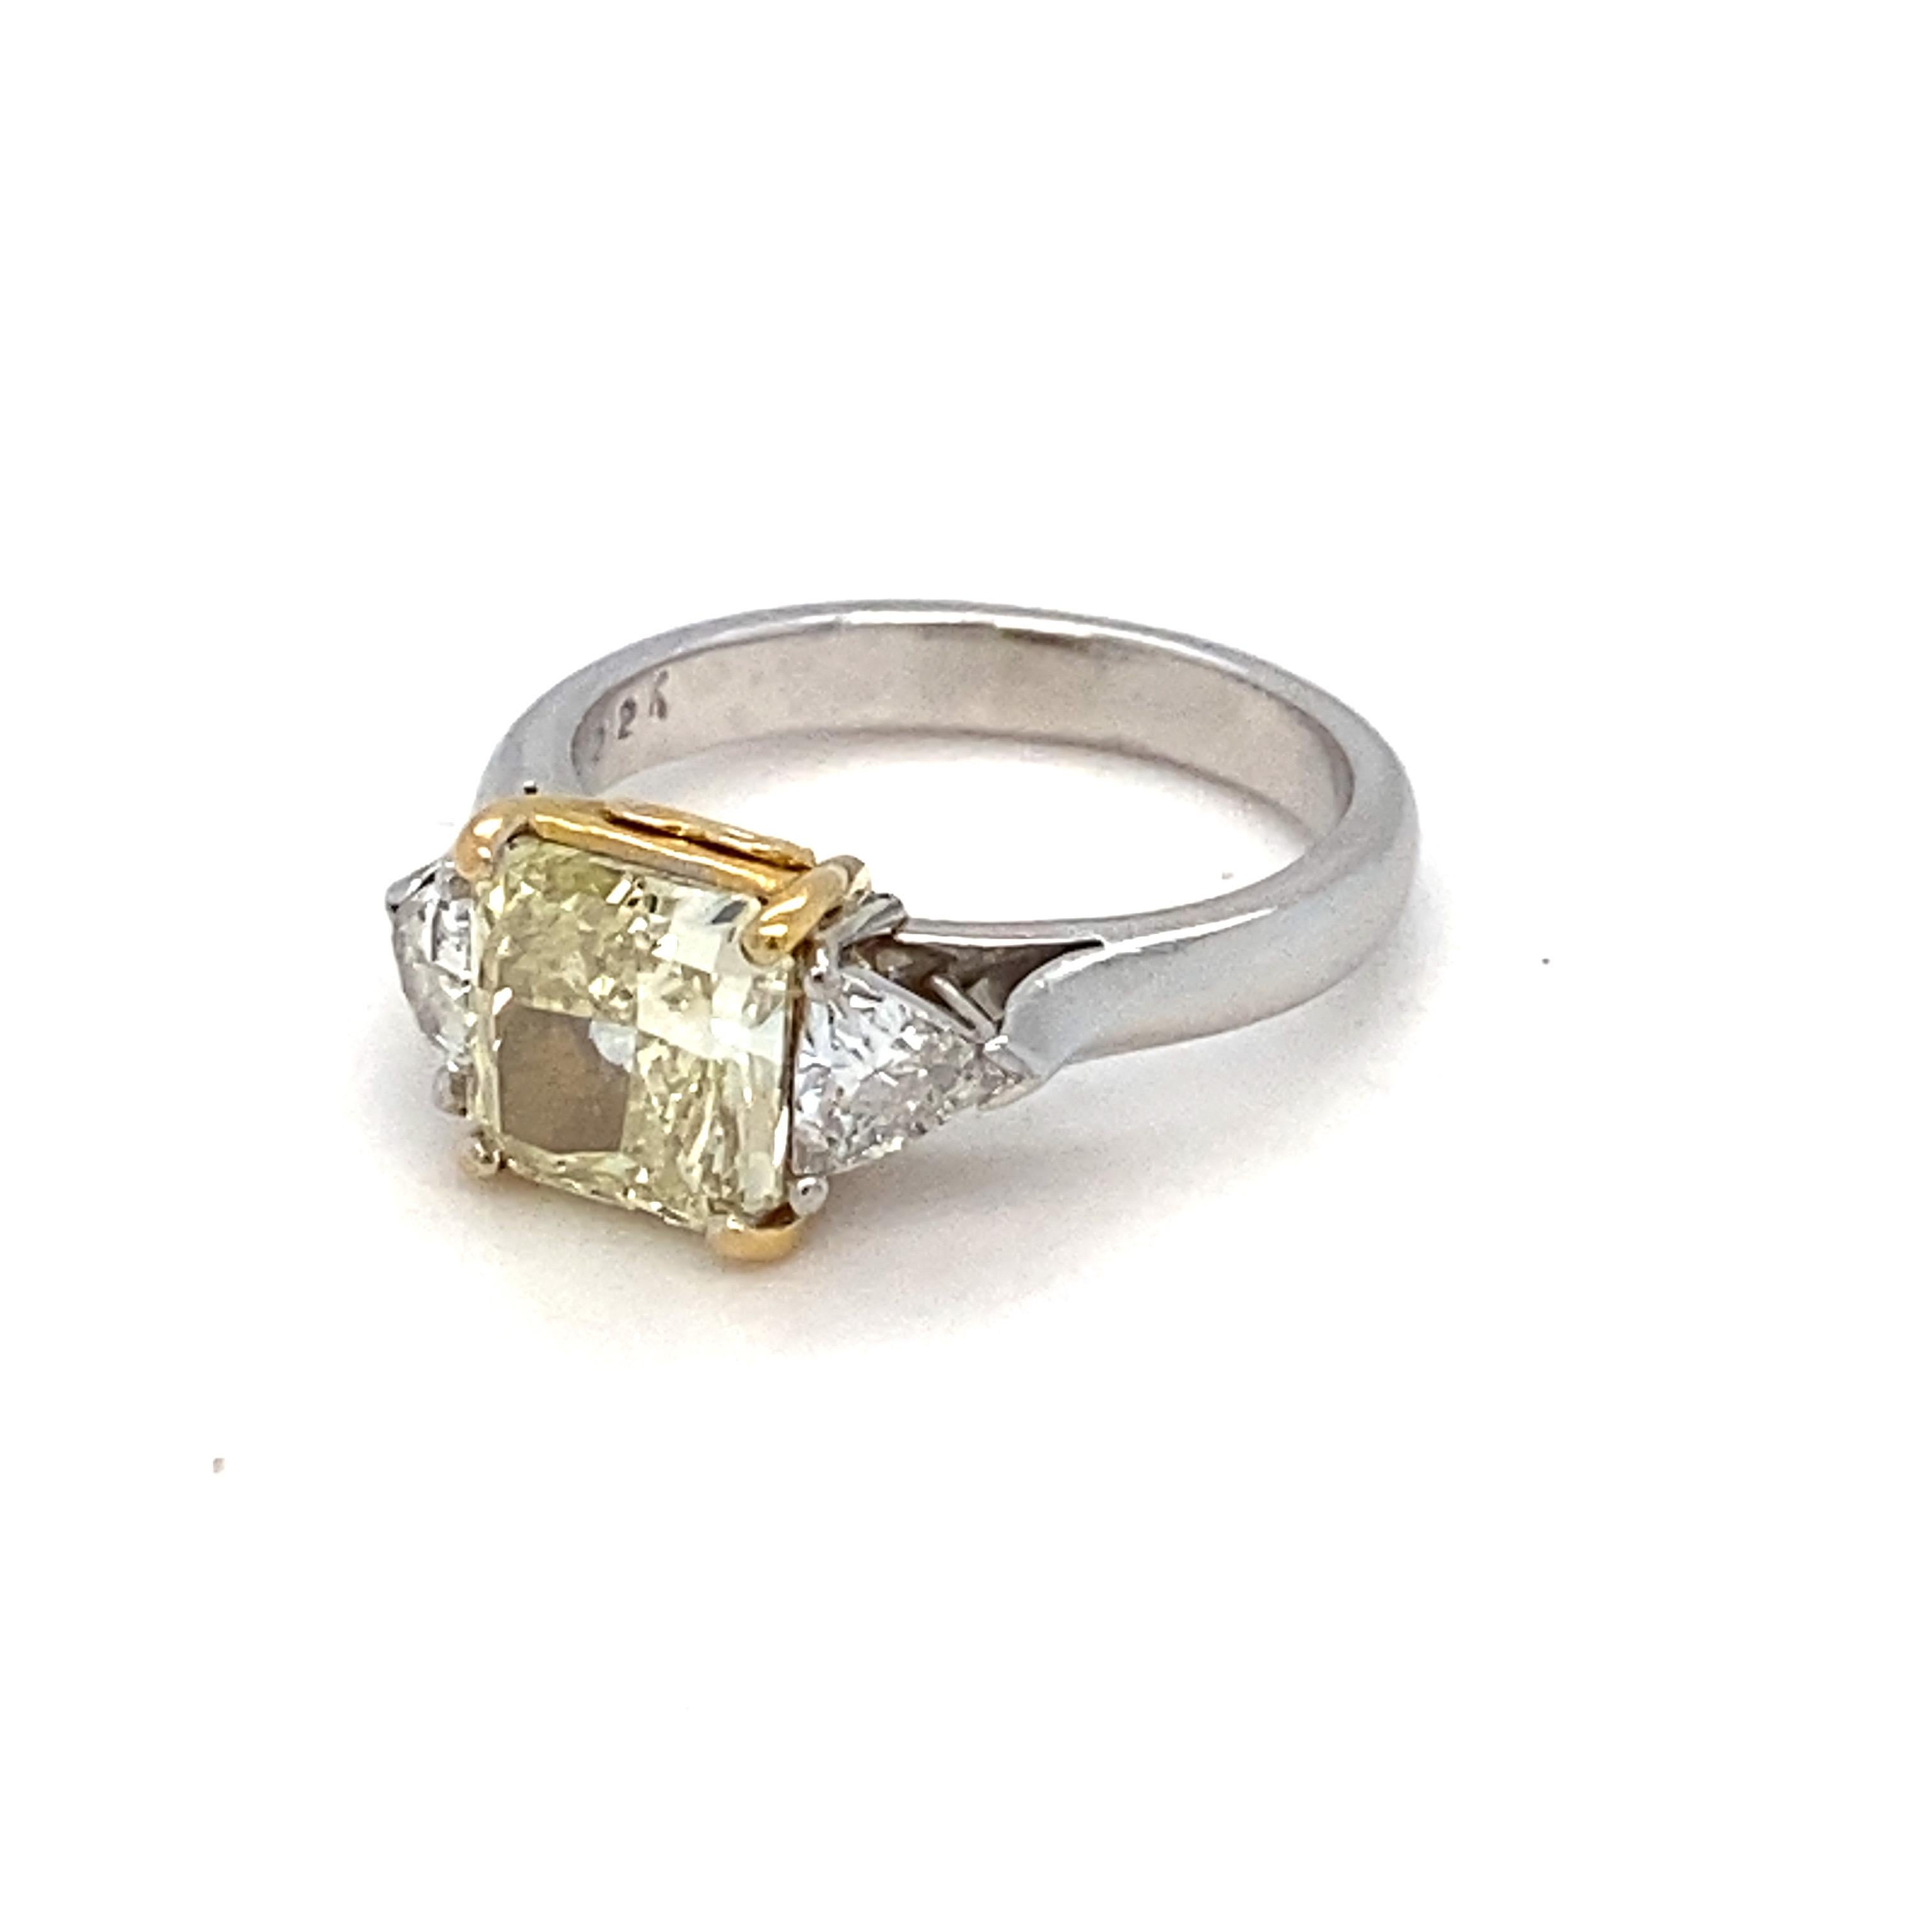 Cushion Cut GIA Certified 1.83 Carat Natural Fancy Light Yellow Diamond Engagement Ring For Sale